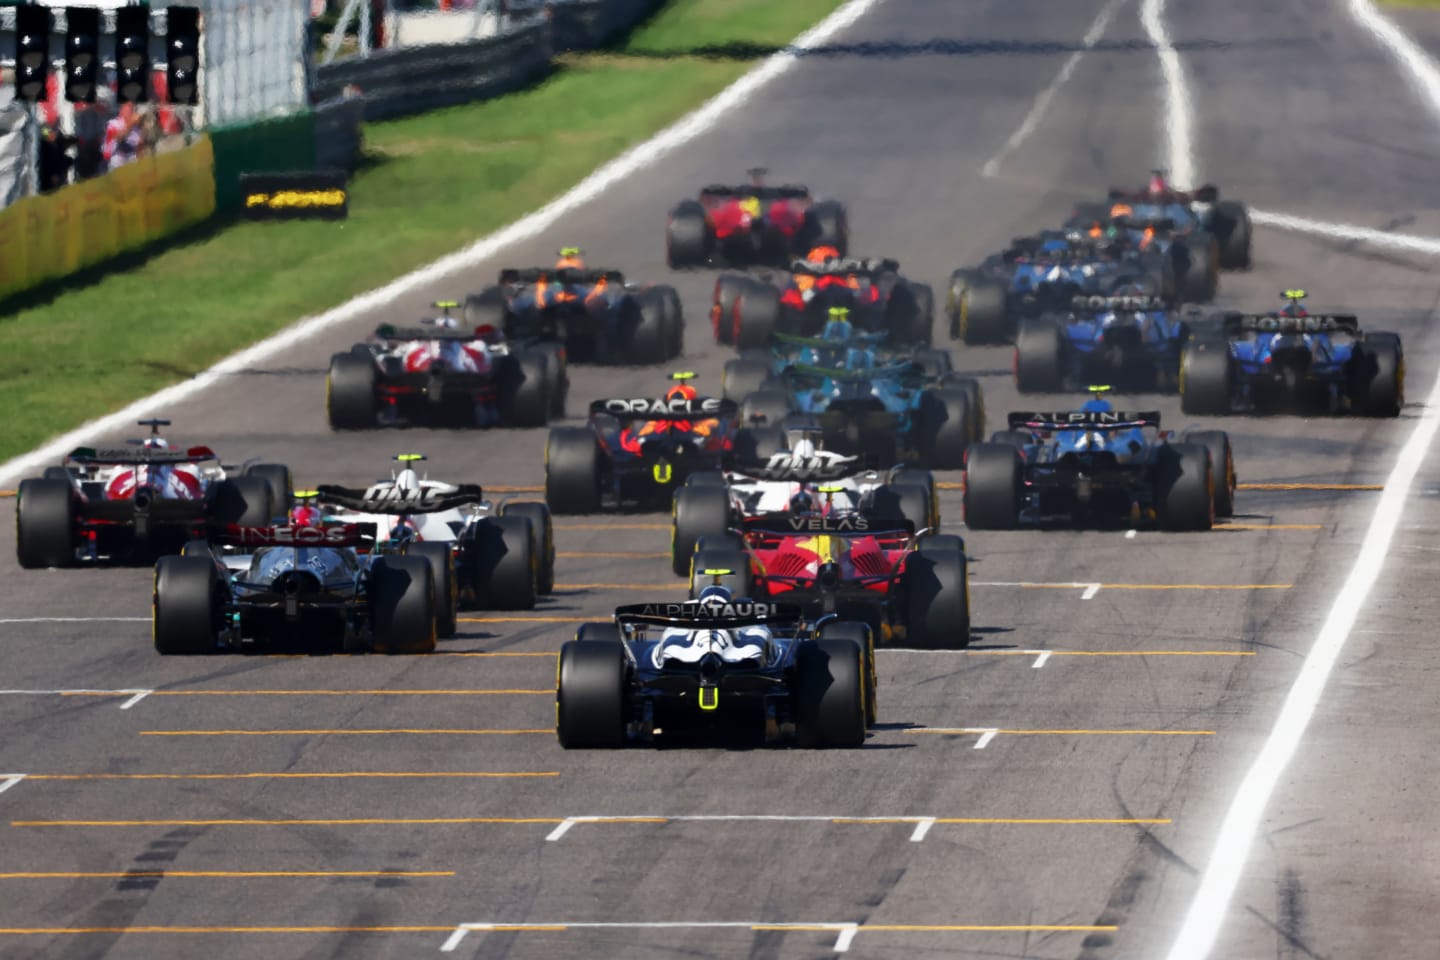 MONZA, ITALY - SEPTEMBER 11: A rear view of the start of the F1 Grand Prix of Italy at Autodromo